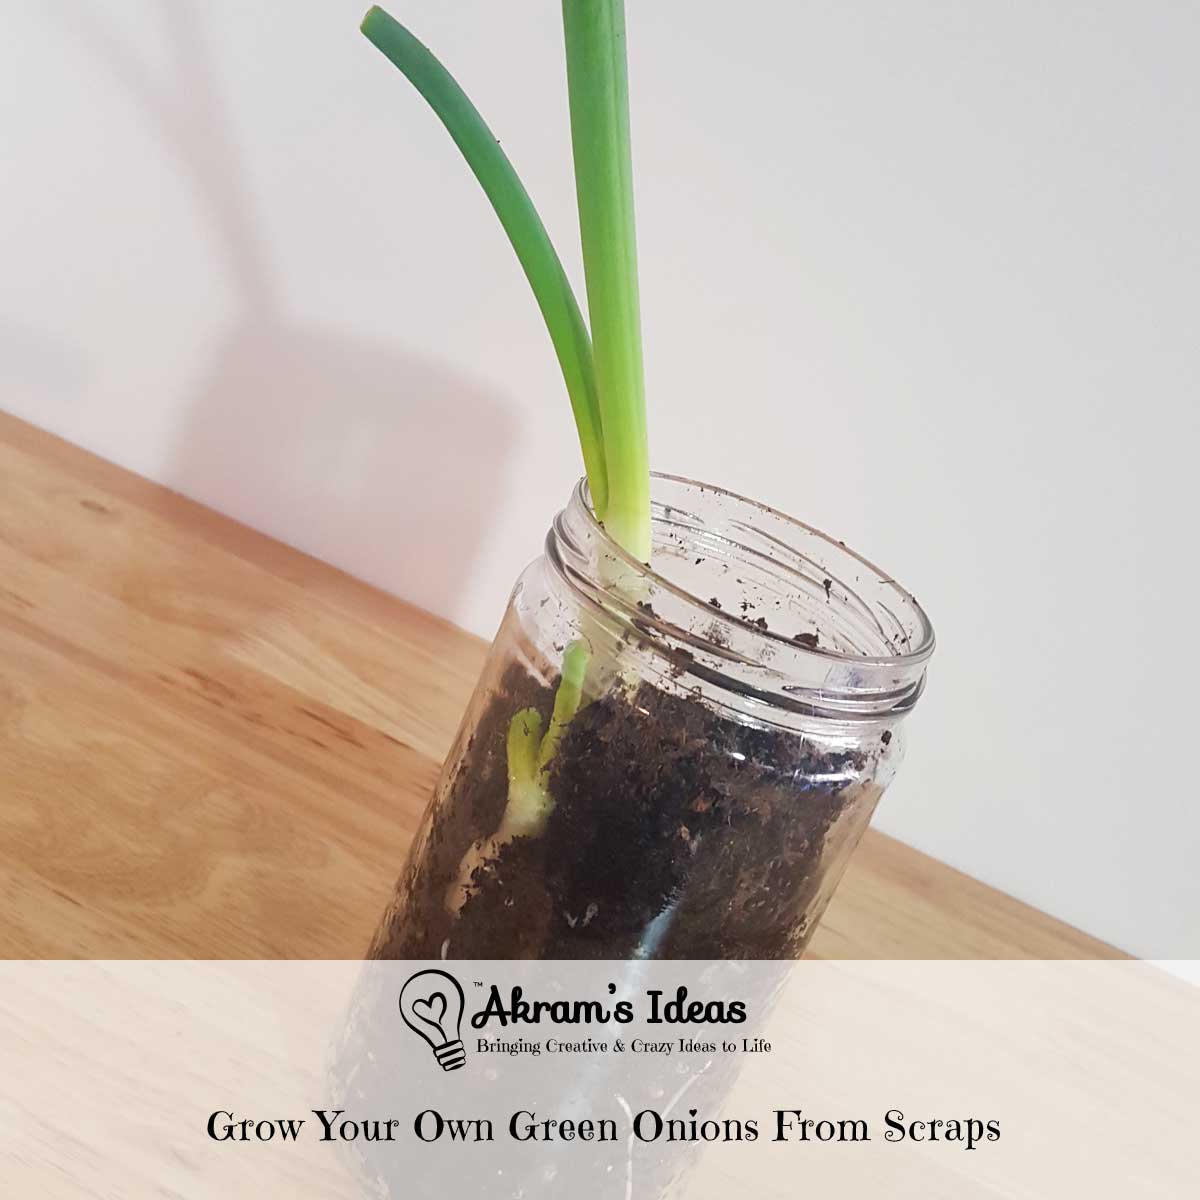 Akram's Ideas: Grow Your Own Green Onions From Scraps